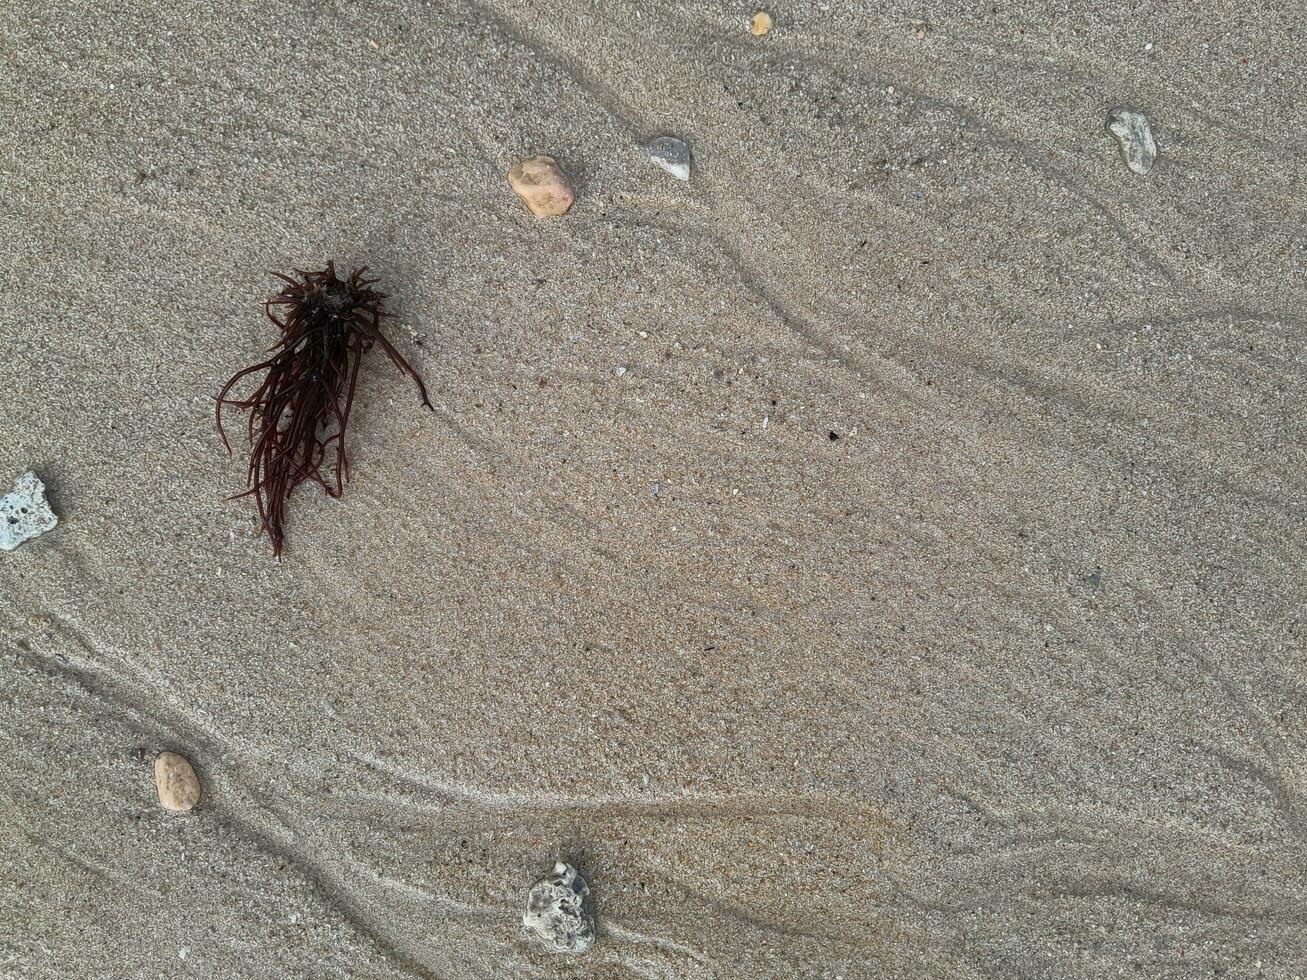 Seaweed isolated on the wet beach sand at east java photo